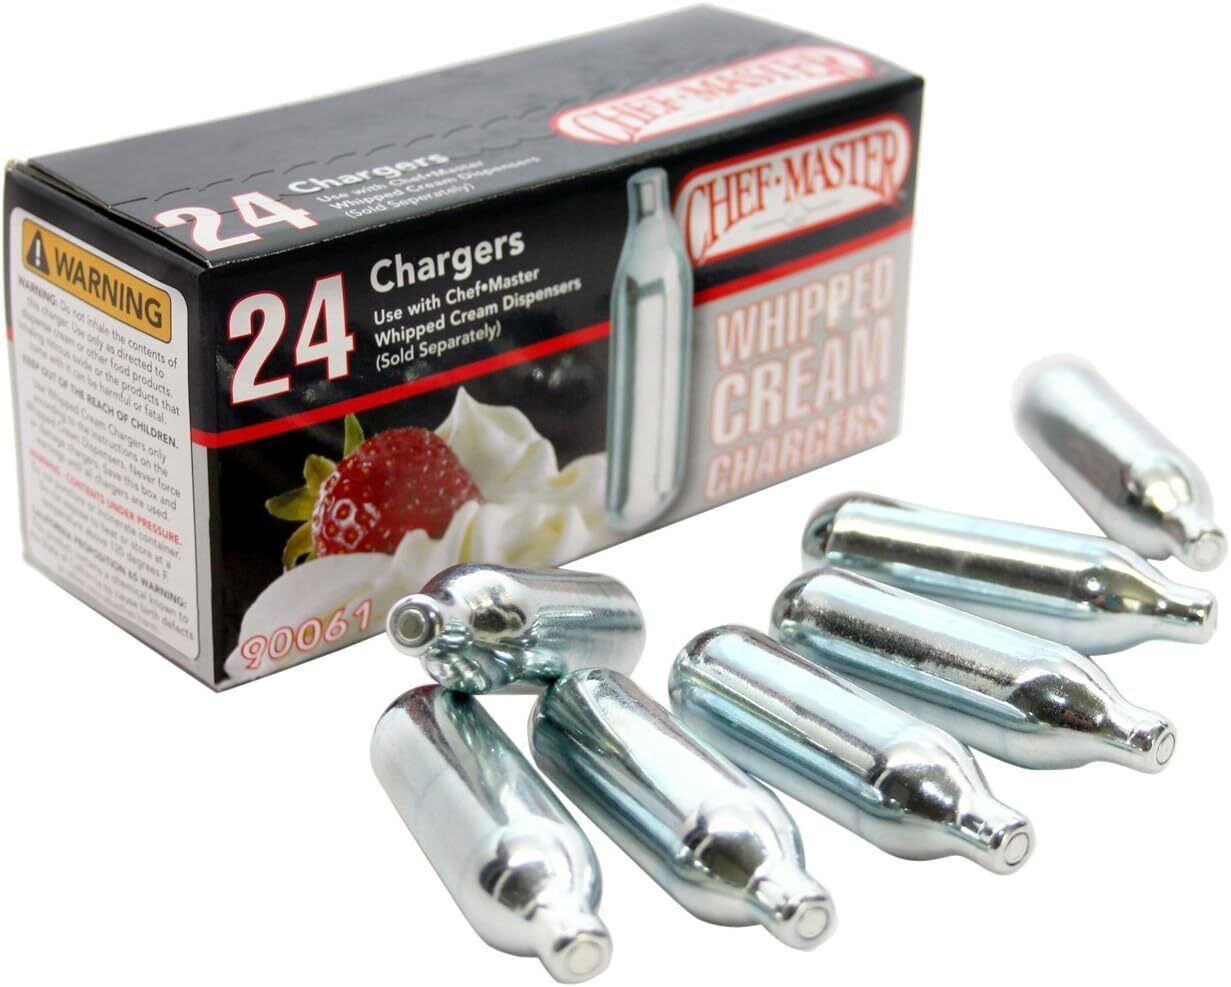 Chef Master 90061 Whipped Cream Chargers, Pack of 24 chargers